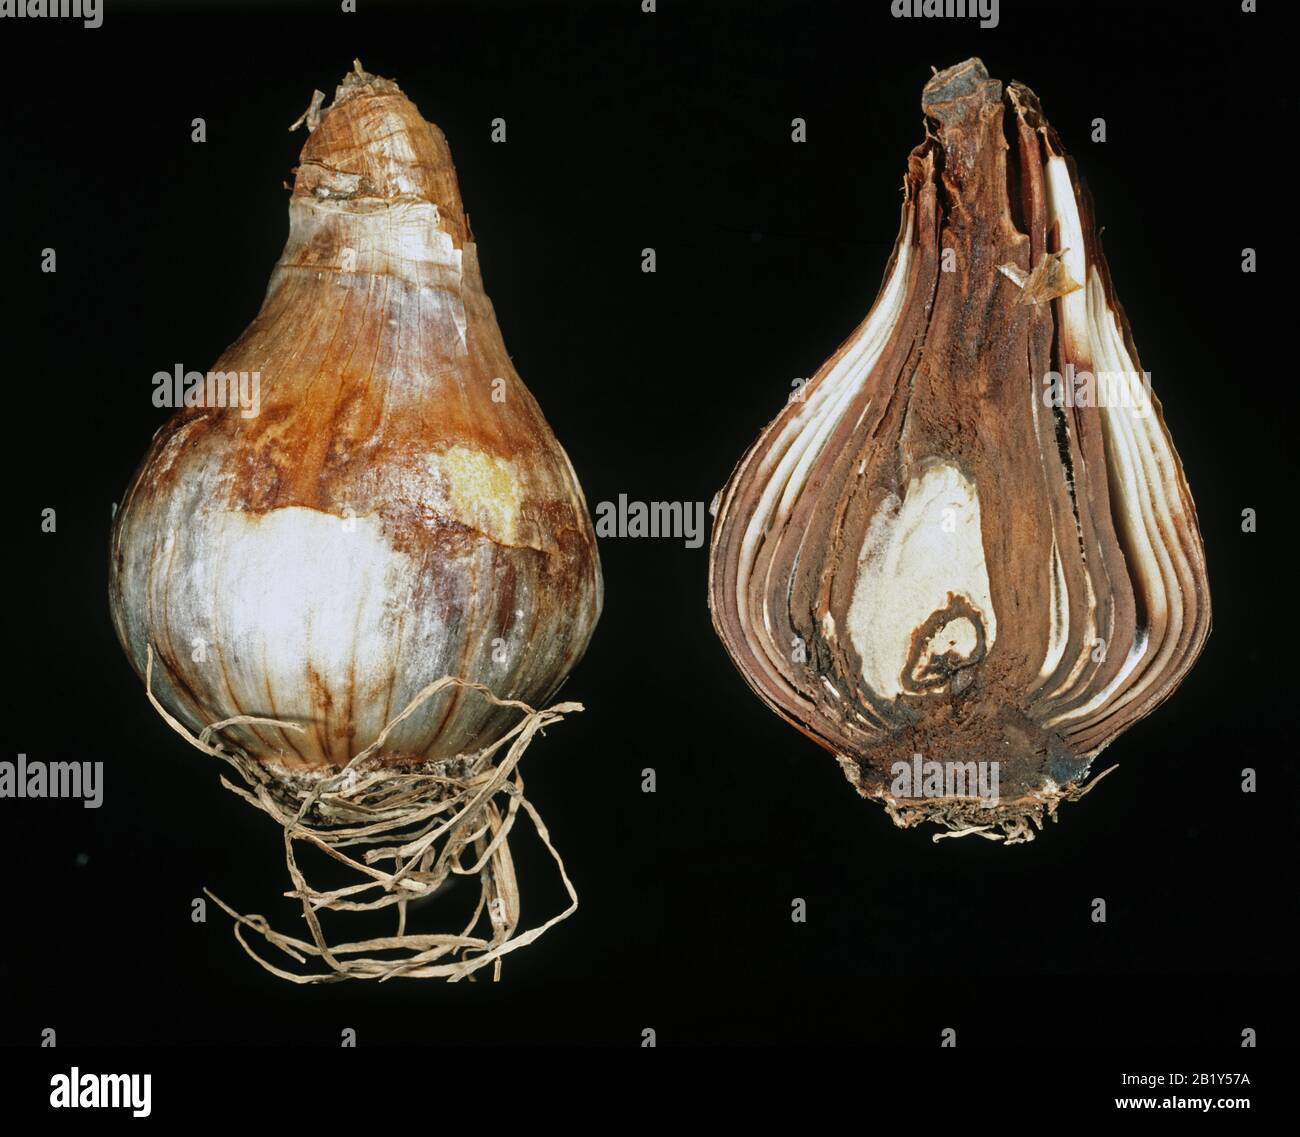 Basal rot (Fusarium oxysporum f. sp. narcissi) on Narcissus bulbs both whole and sectioned to show internal damage and disease Stock Photo